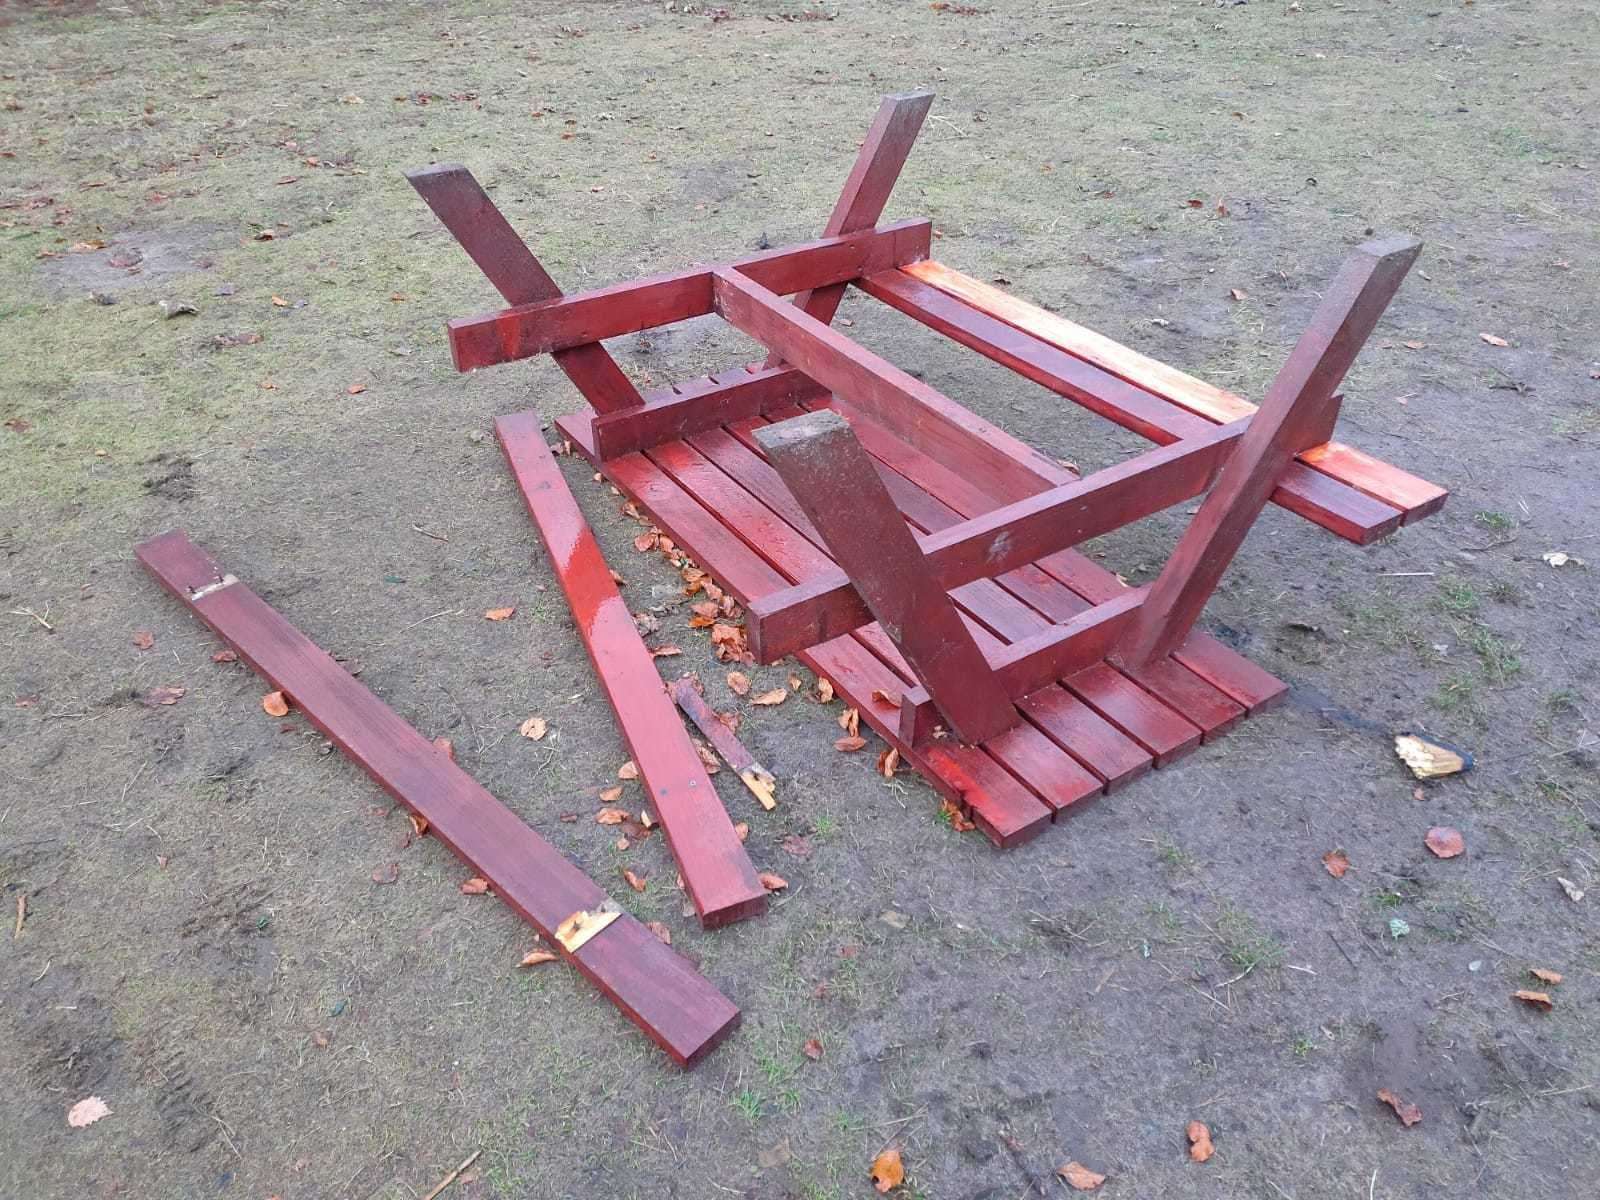 A picnic table was overturned and smashed.